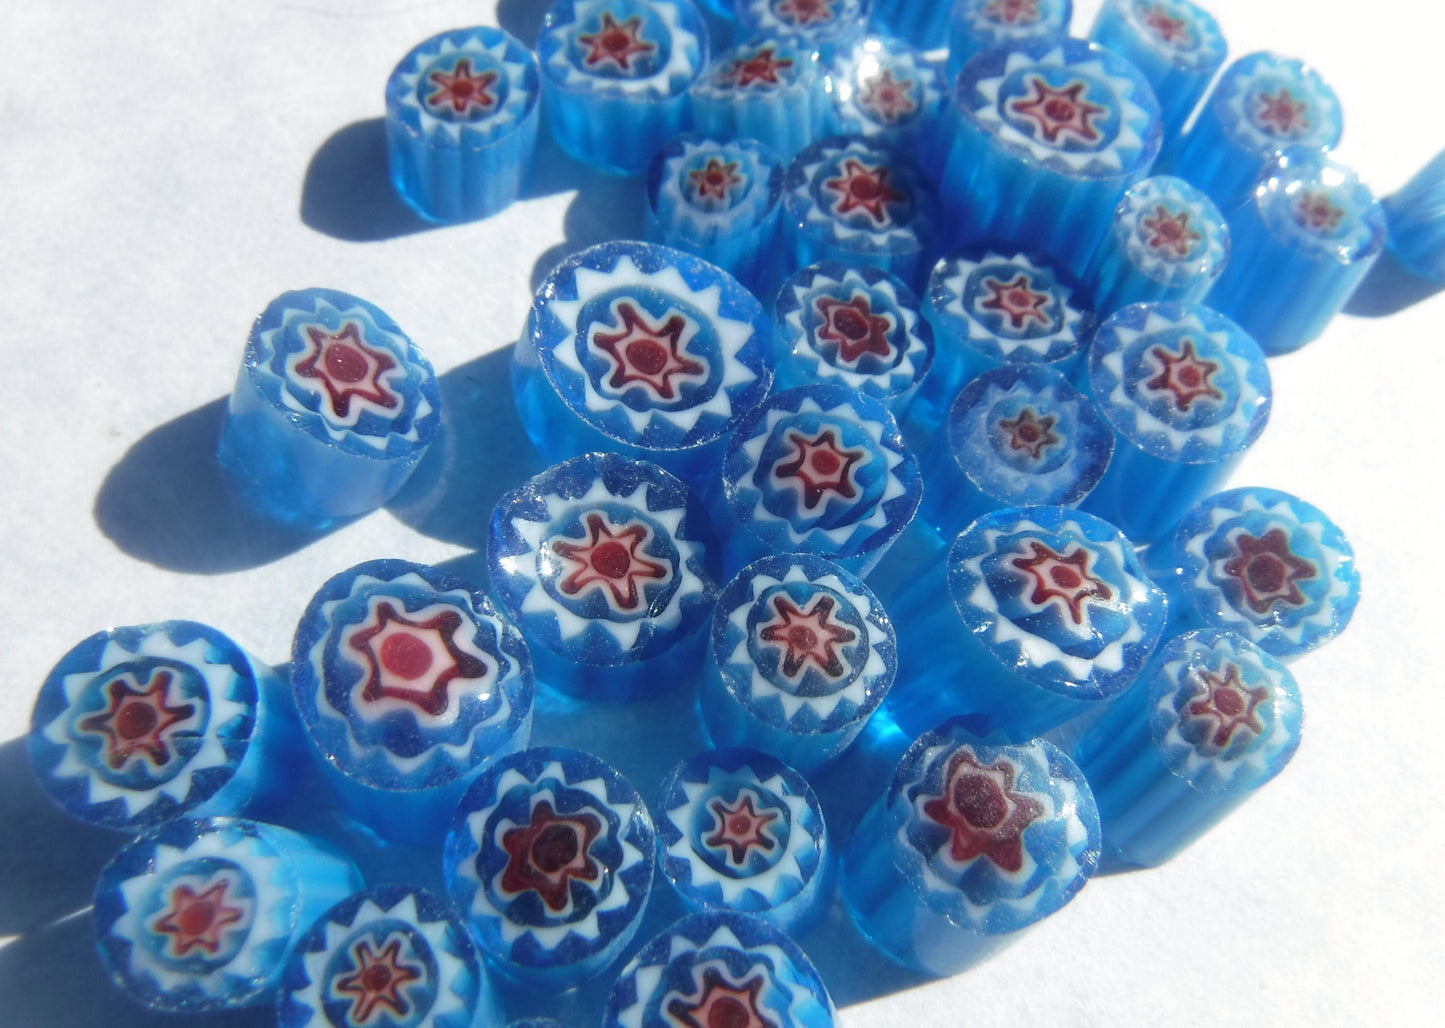 Blue with Red Millefiori - 25 grams - Unique Mosaic Glass Tiles